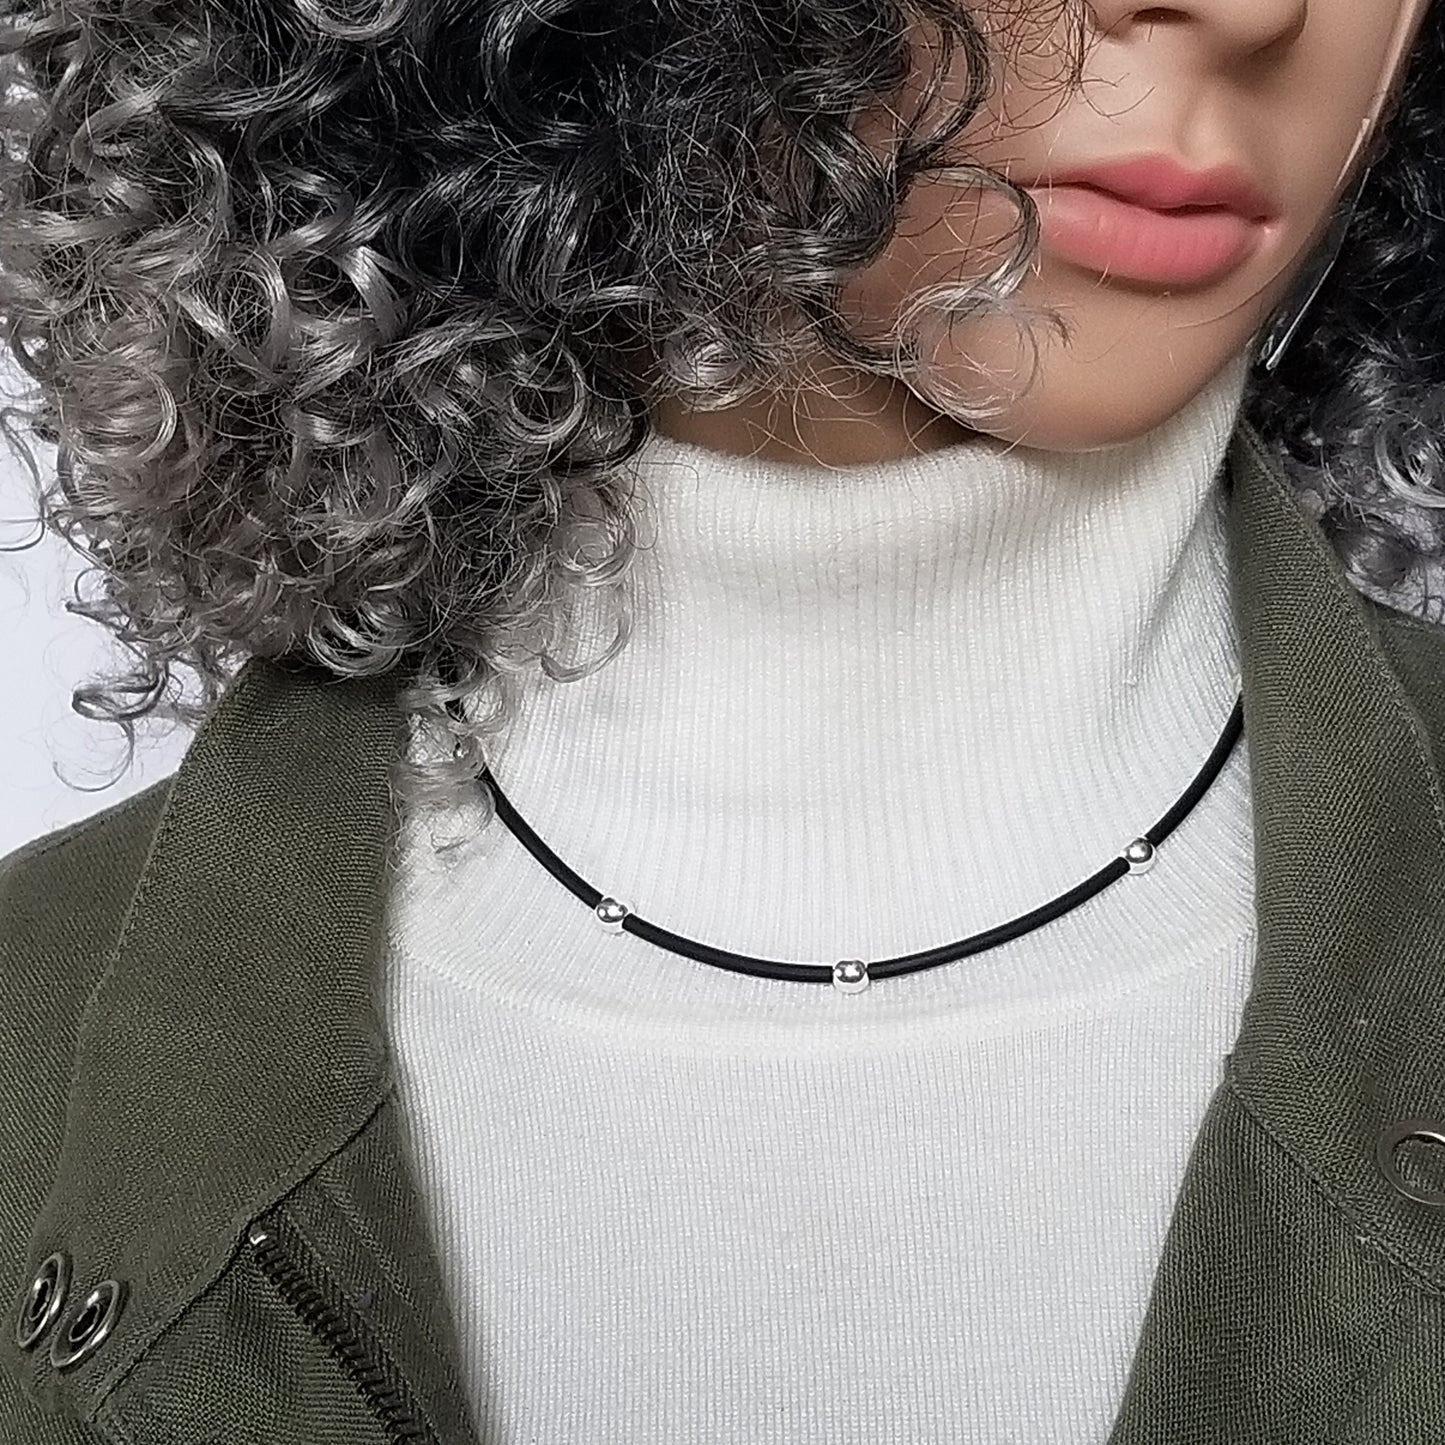 STERLING SILVER 6 BALL CHOKER NECKLACE